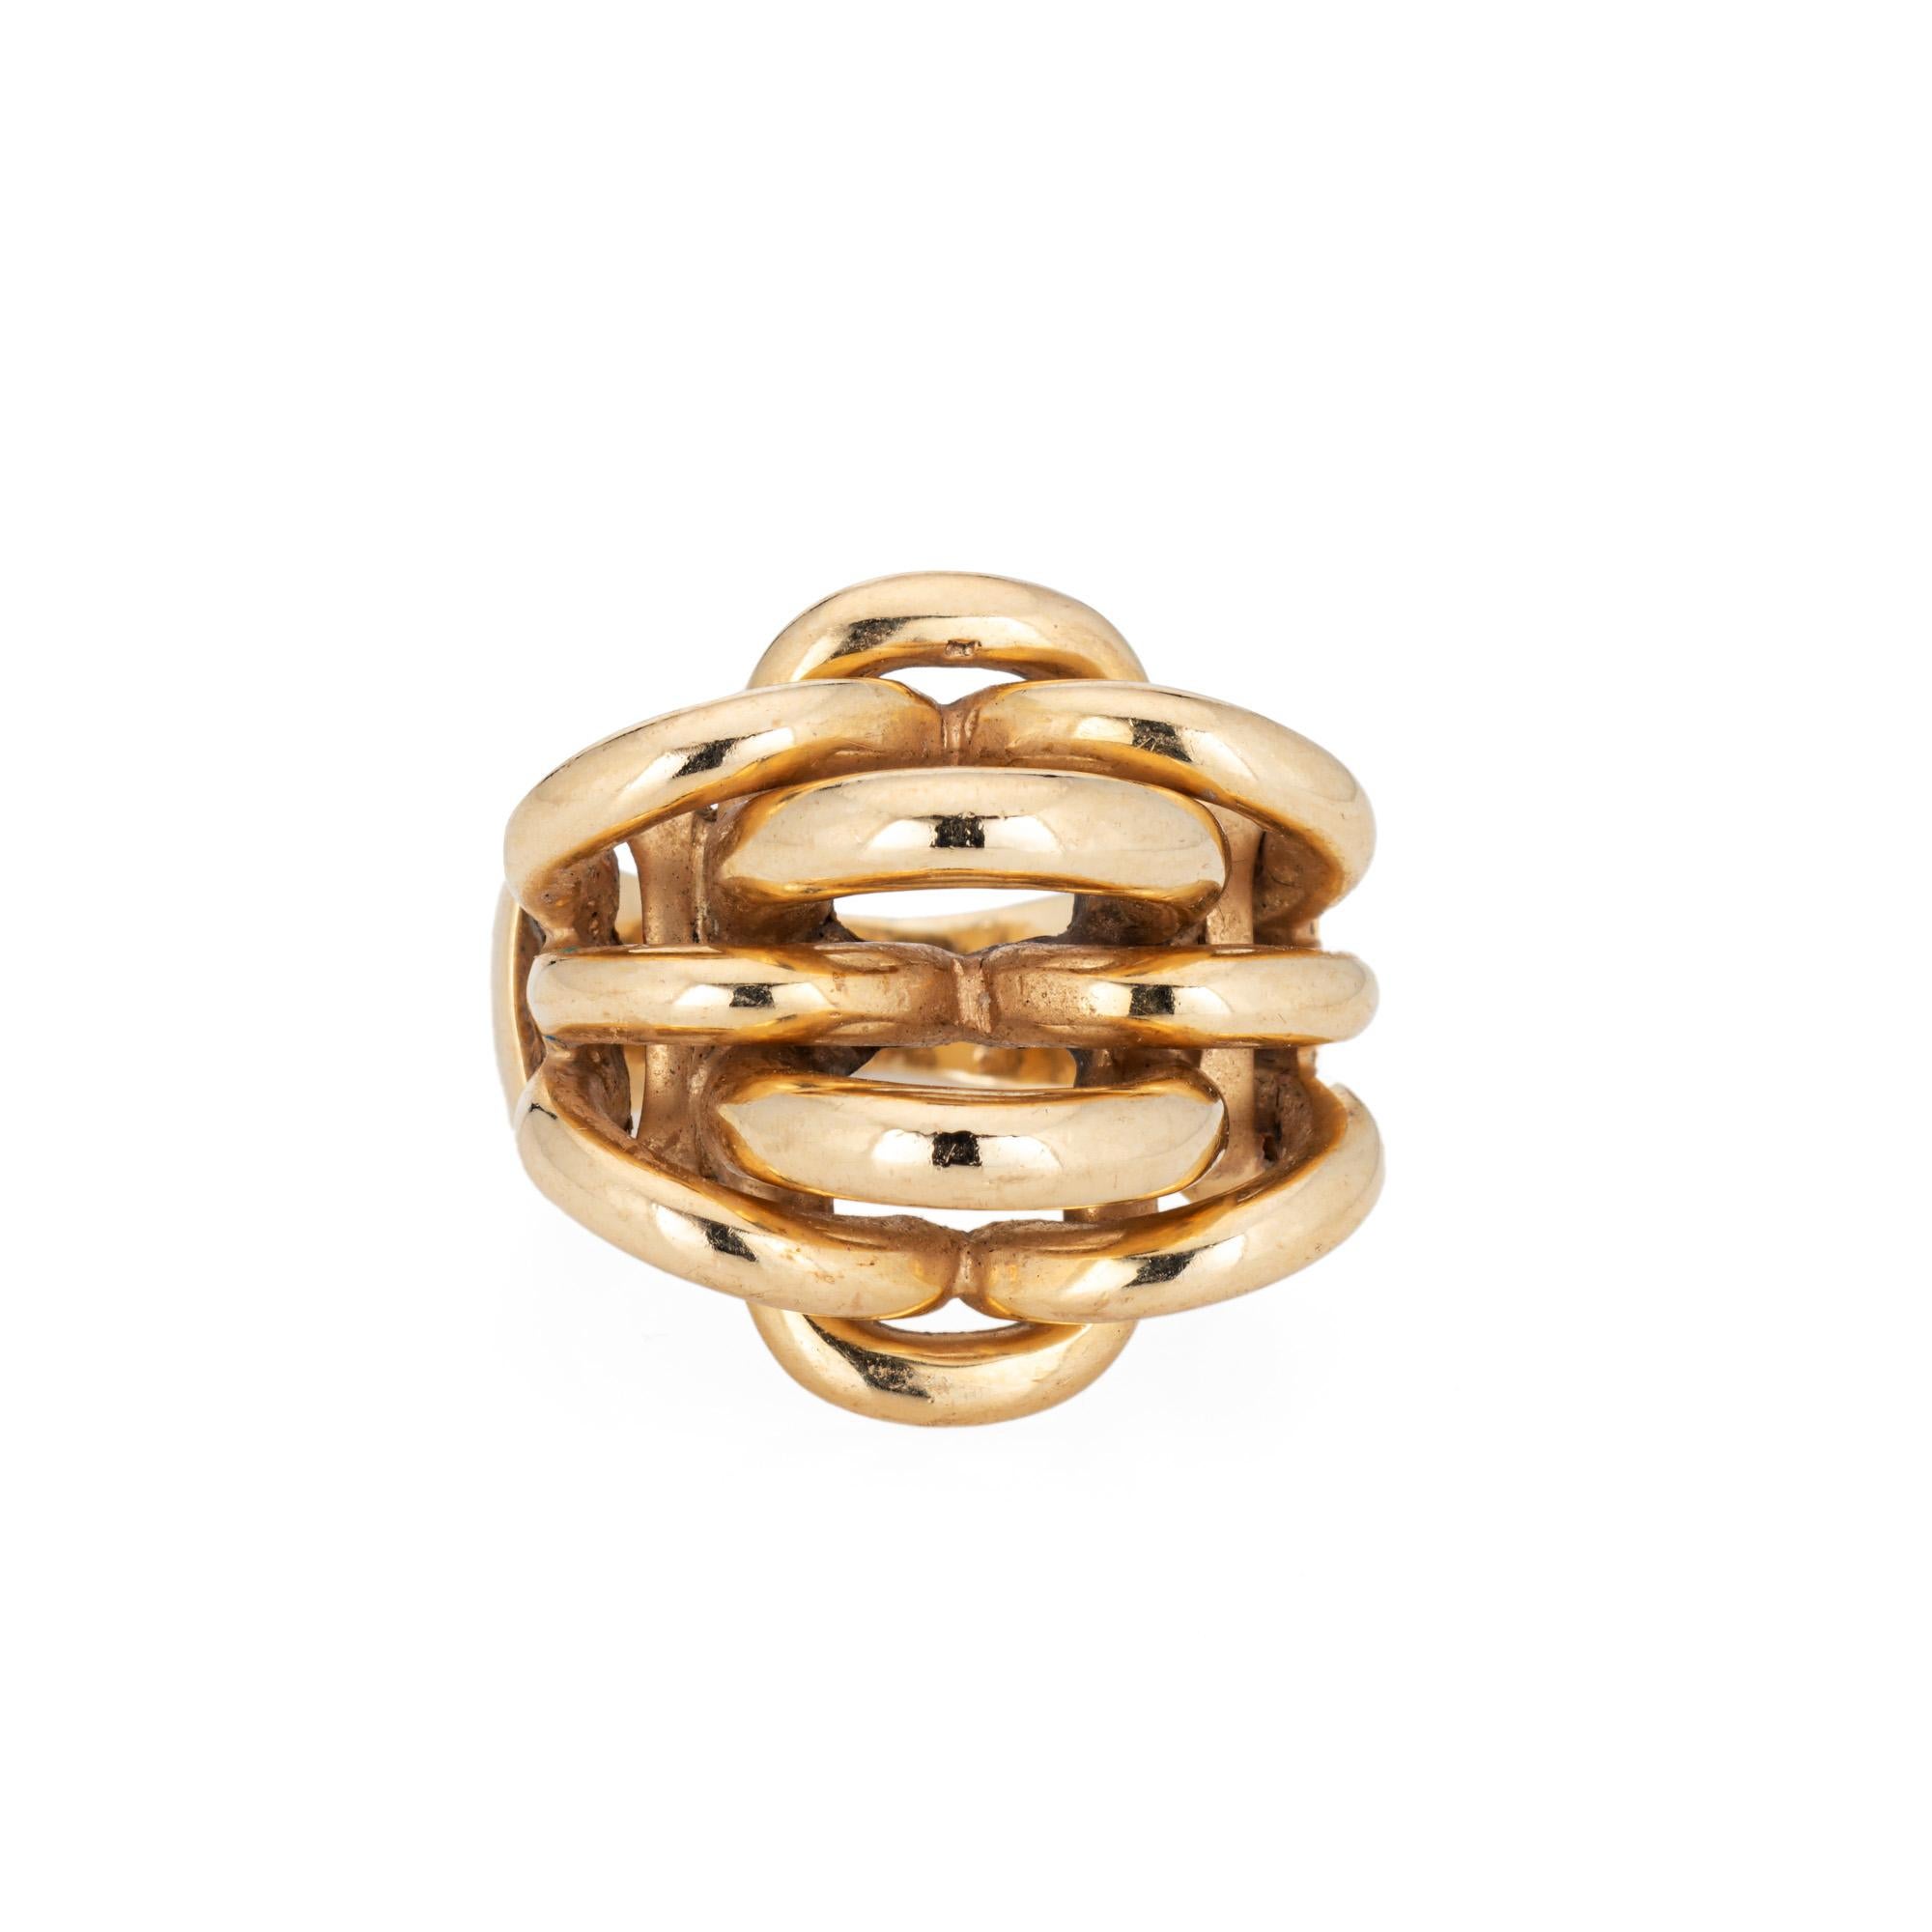 Vintage Tiffany & Co 'Woven' dome ring crafted in 14 karat yellow gold (circa 1980s to 1990s).  

The domed band features a visually striking woven design and makes a great statement on the hand. Weighing 16.8 grams the ring has a weighty feel on